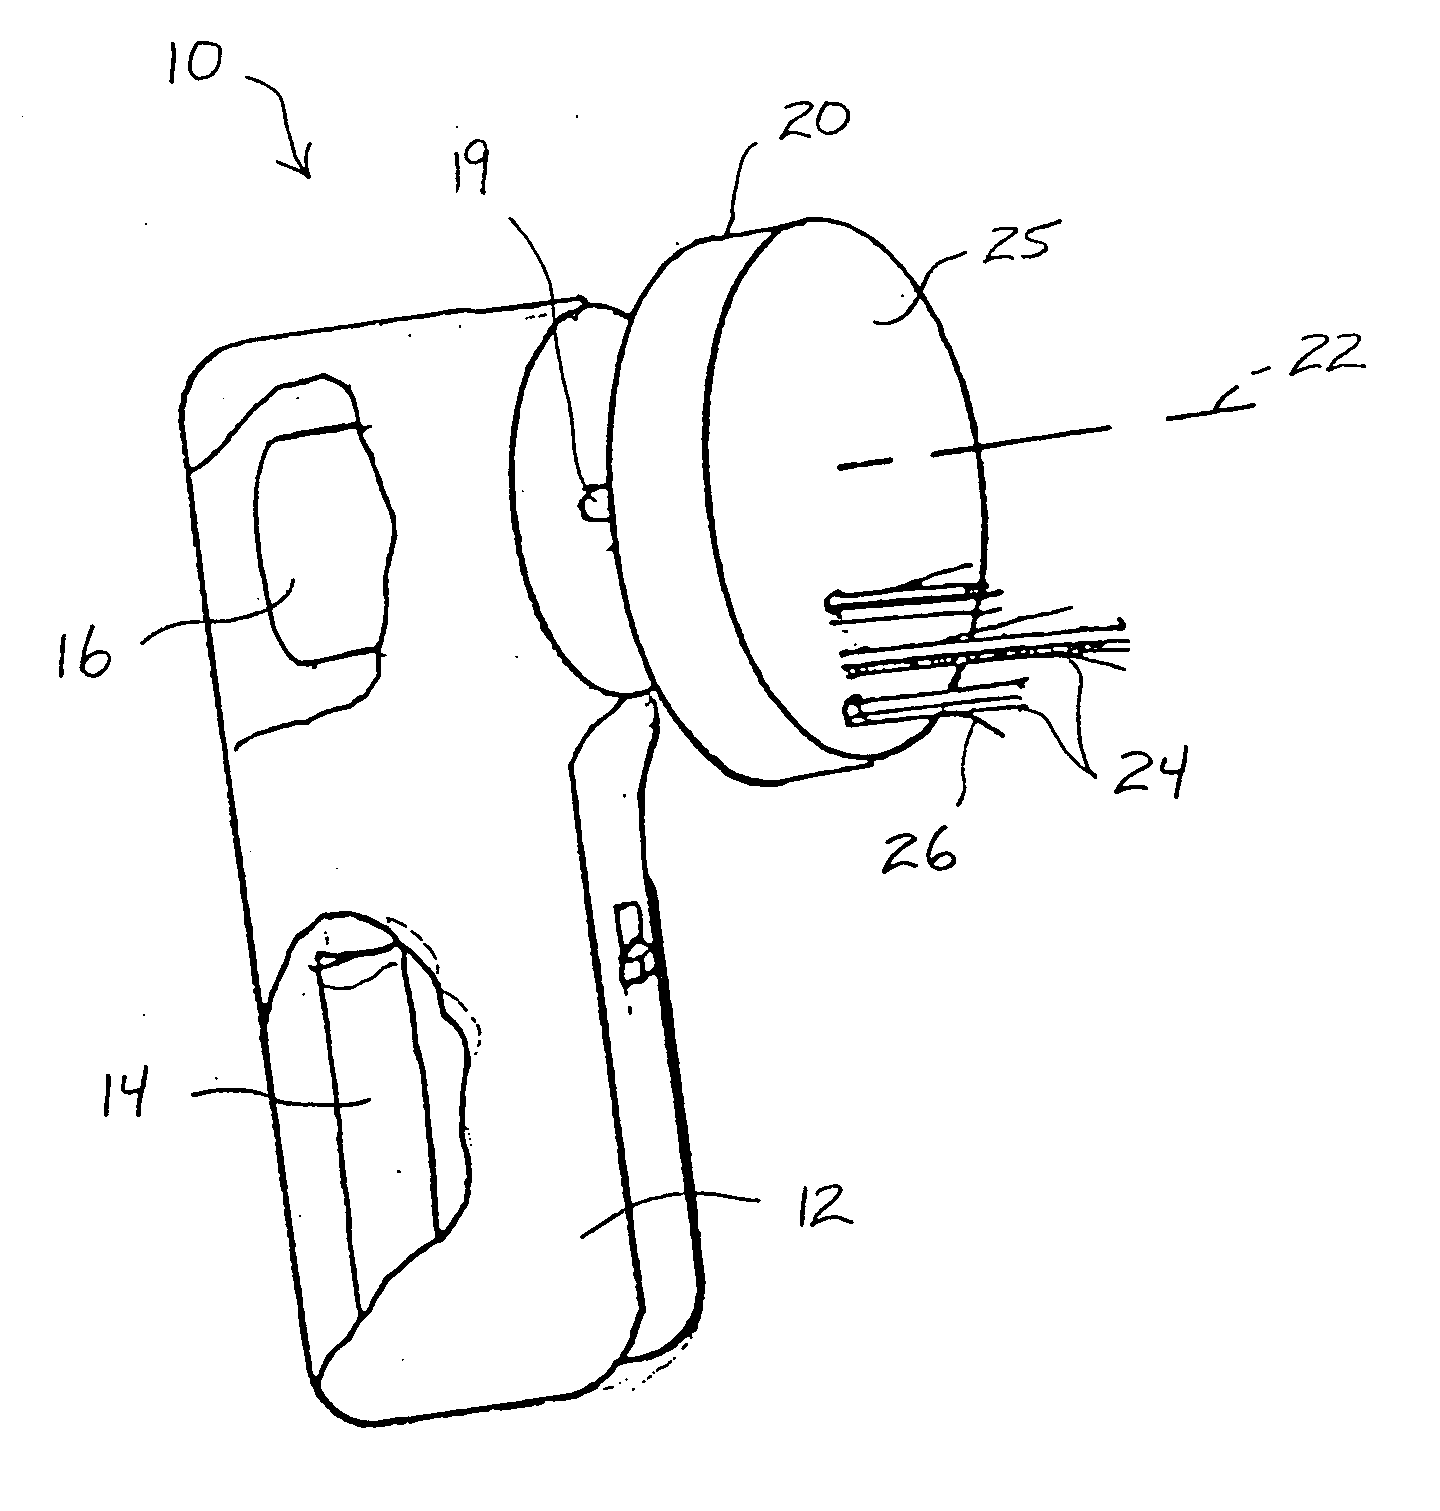 Spinning fiber optic novelty device and its associated method of manufacture